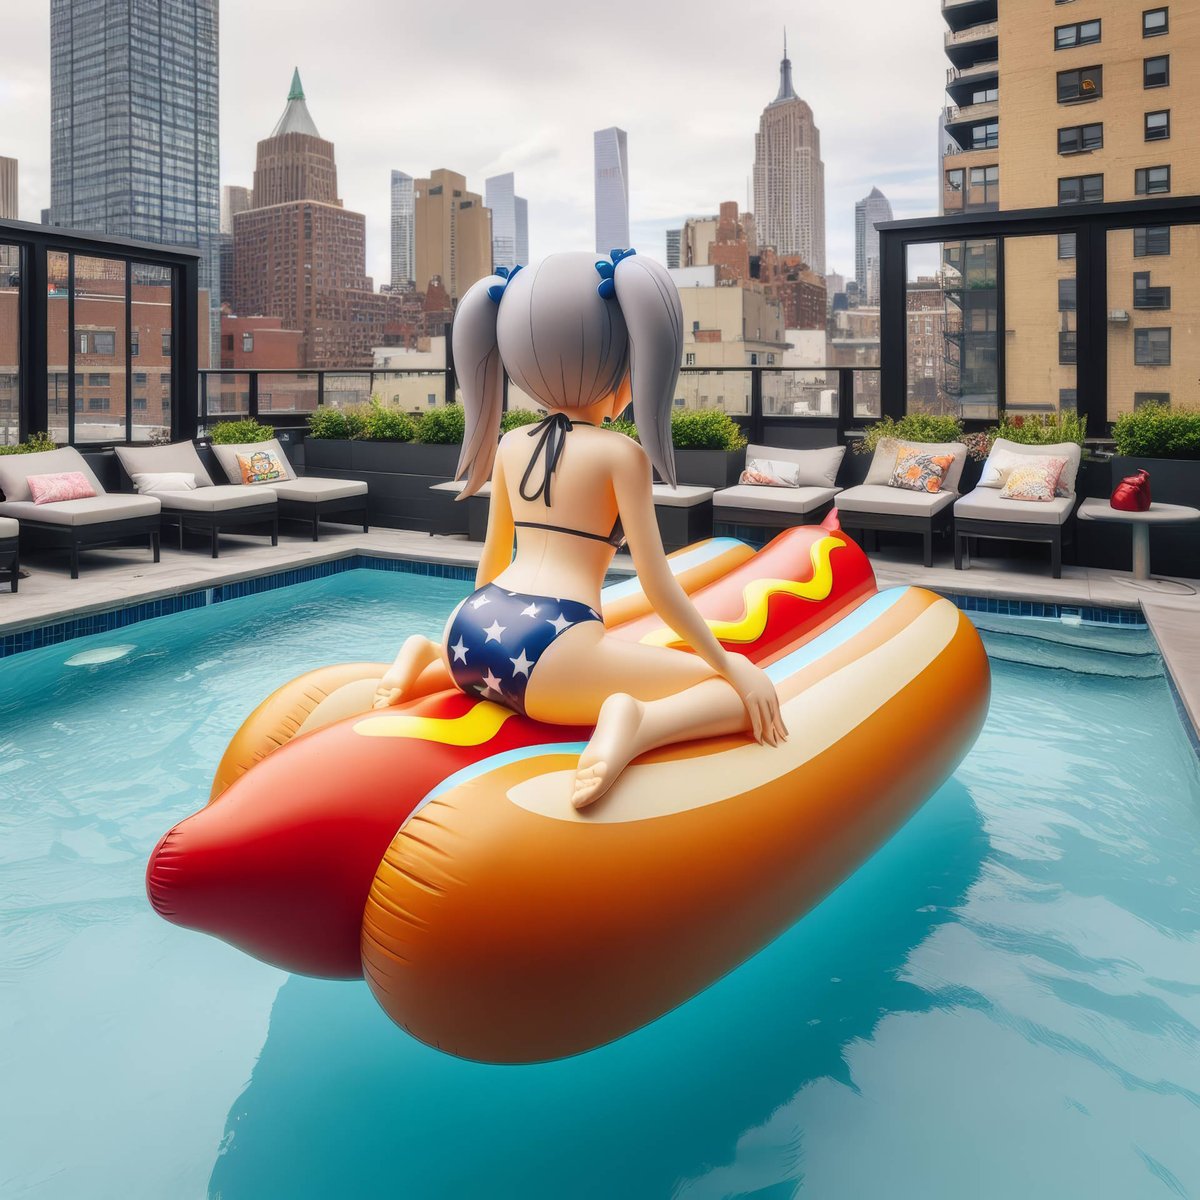 As part of a continuing theme of #foodporn we'd like to introduce the #hotdog.
Perhaps you have a hotdog of your own you'd like to introduce to her? 🤭 as she perches atop that soft and slick #poolfloat

Oh crap it's winter in NY rn. Well, just imagine this 6 months ago/from now